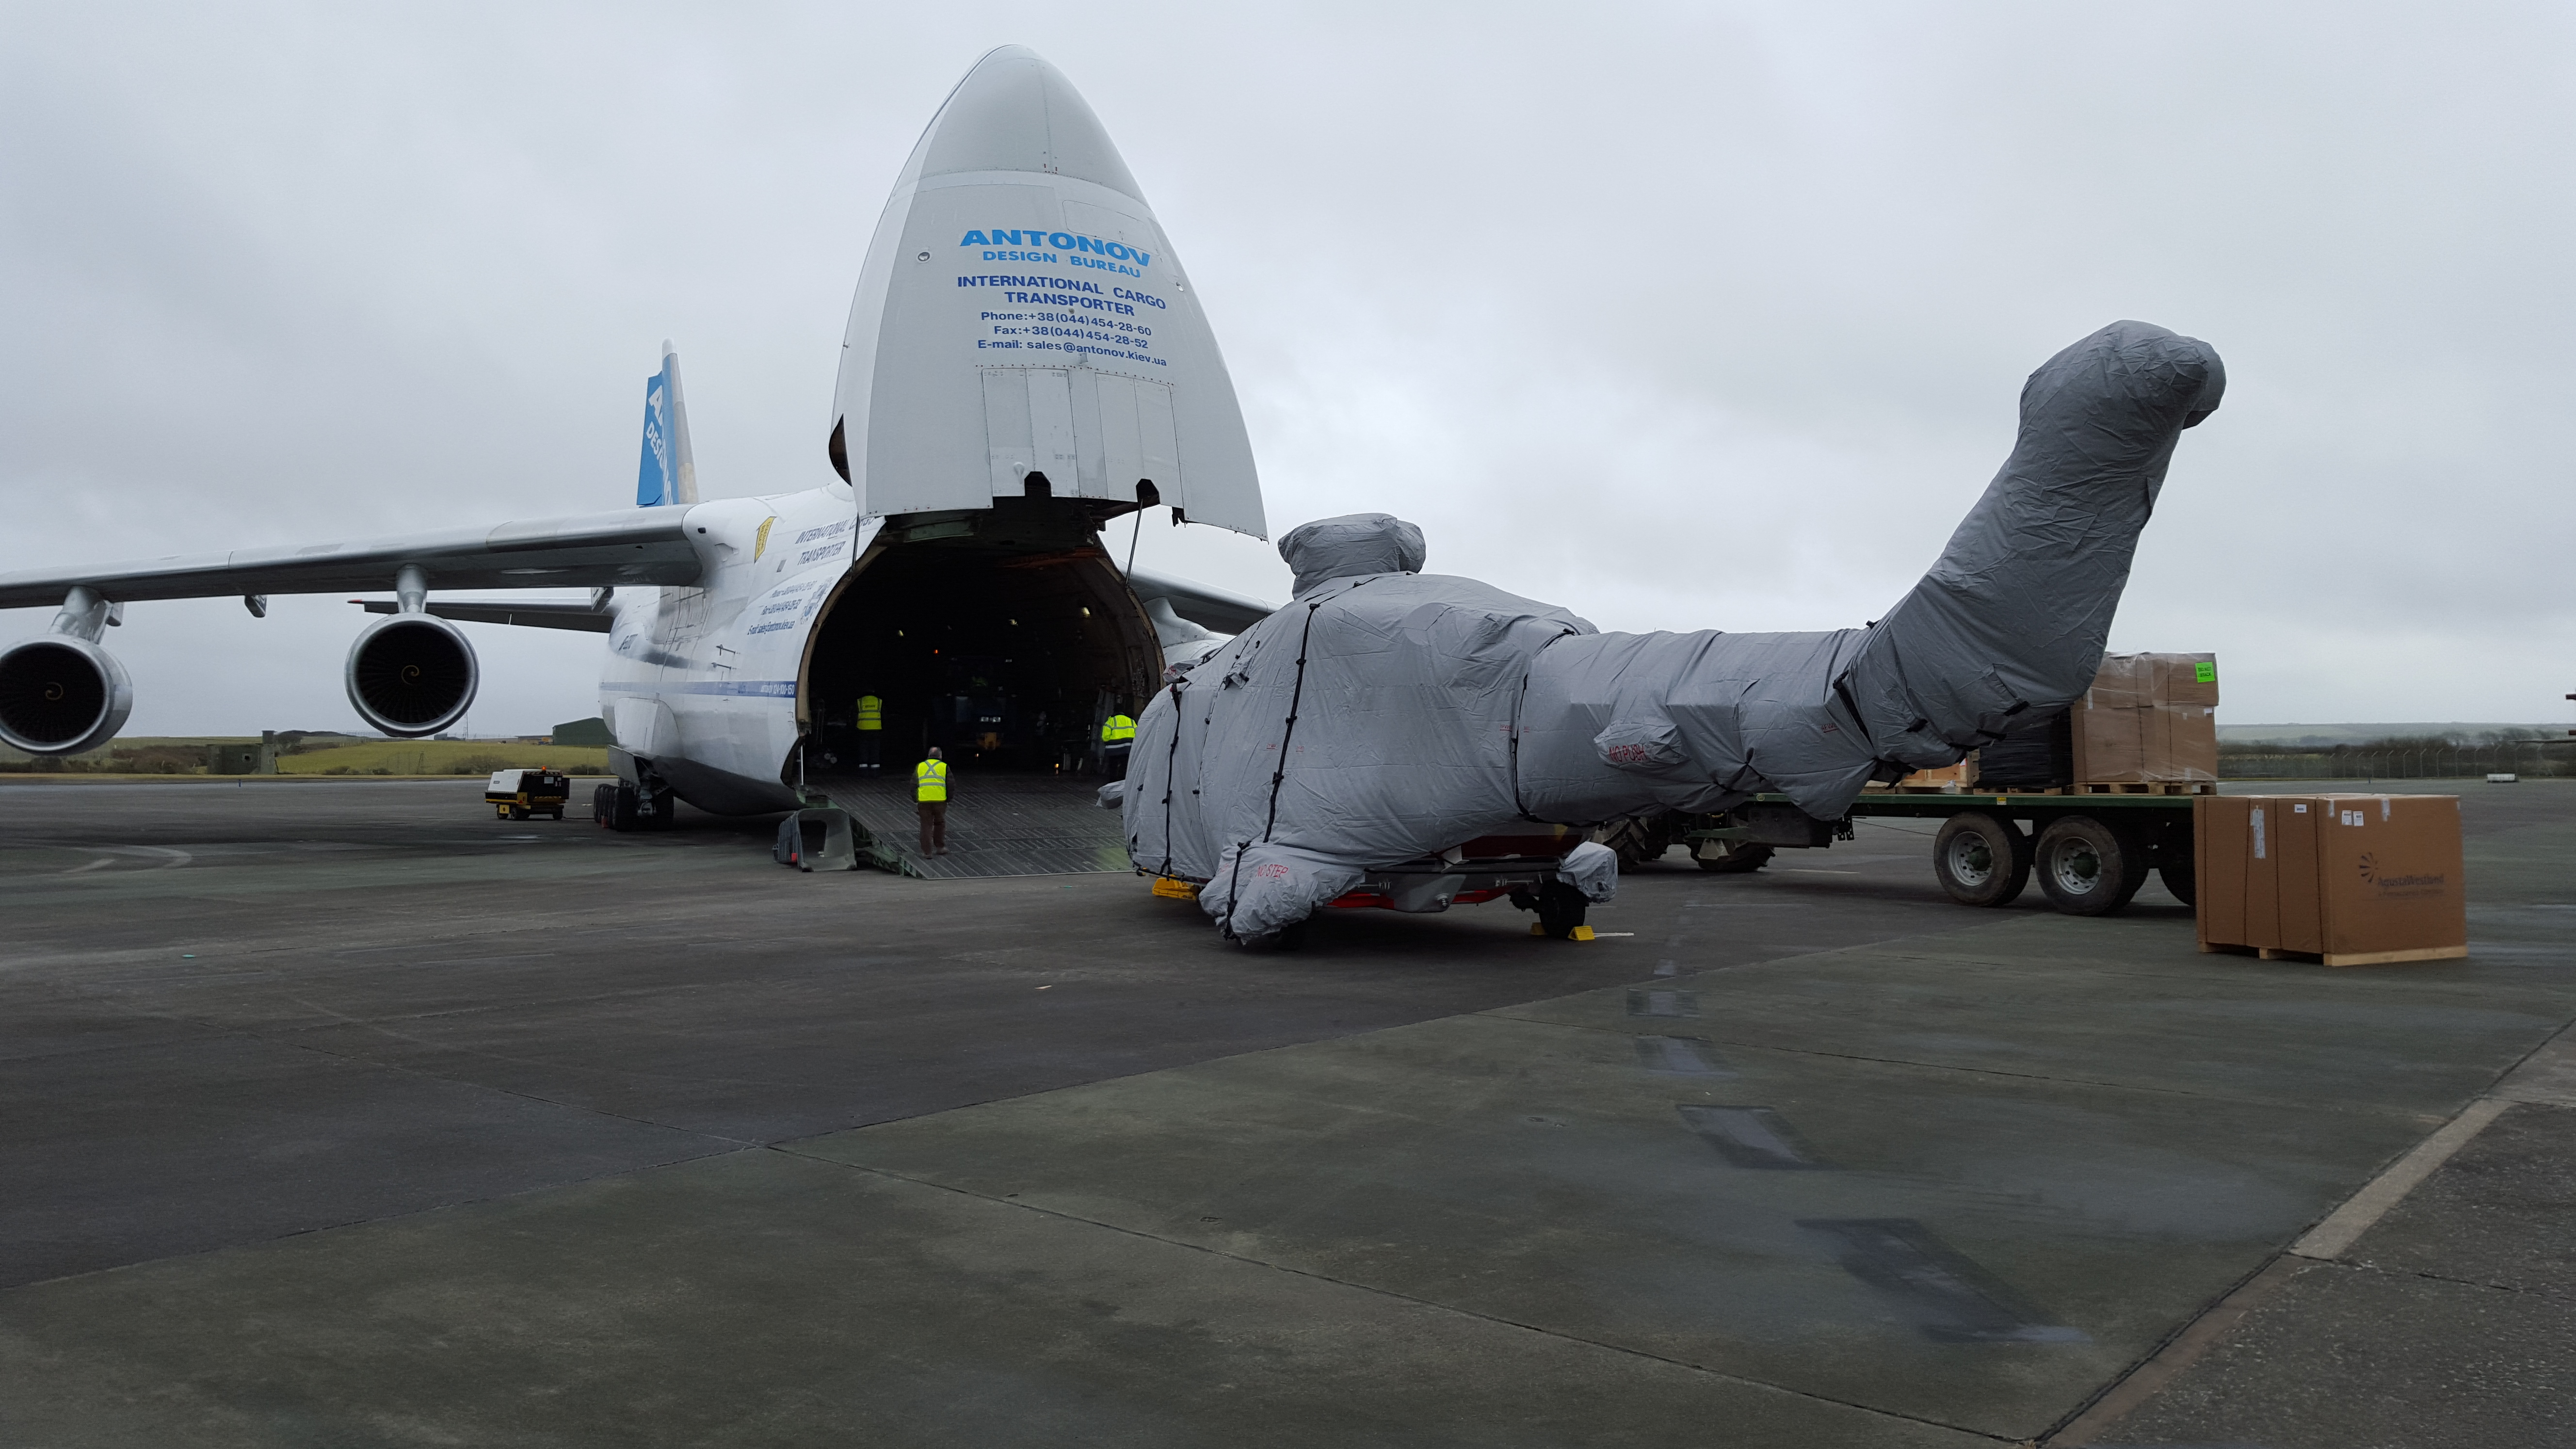 A Team AAR AW189 helicopter being loaded on to a giant Antonov AN124, the largest aircraft ever to land at Newquay